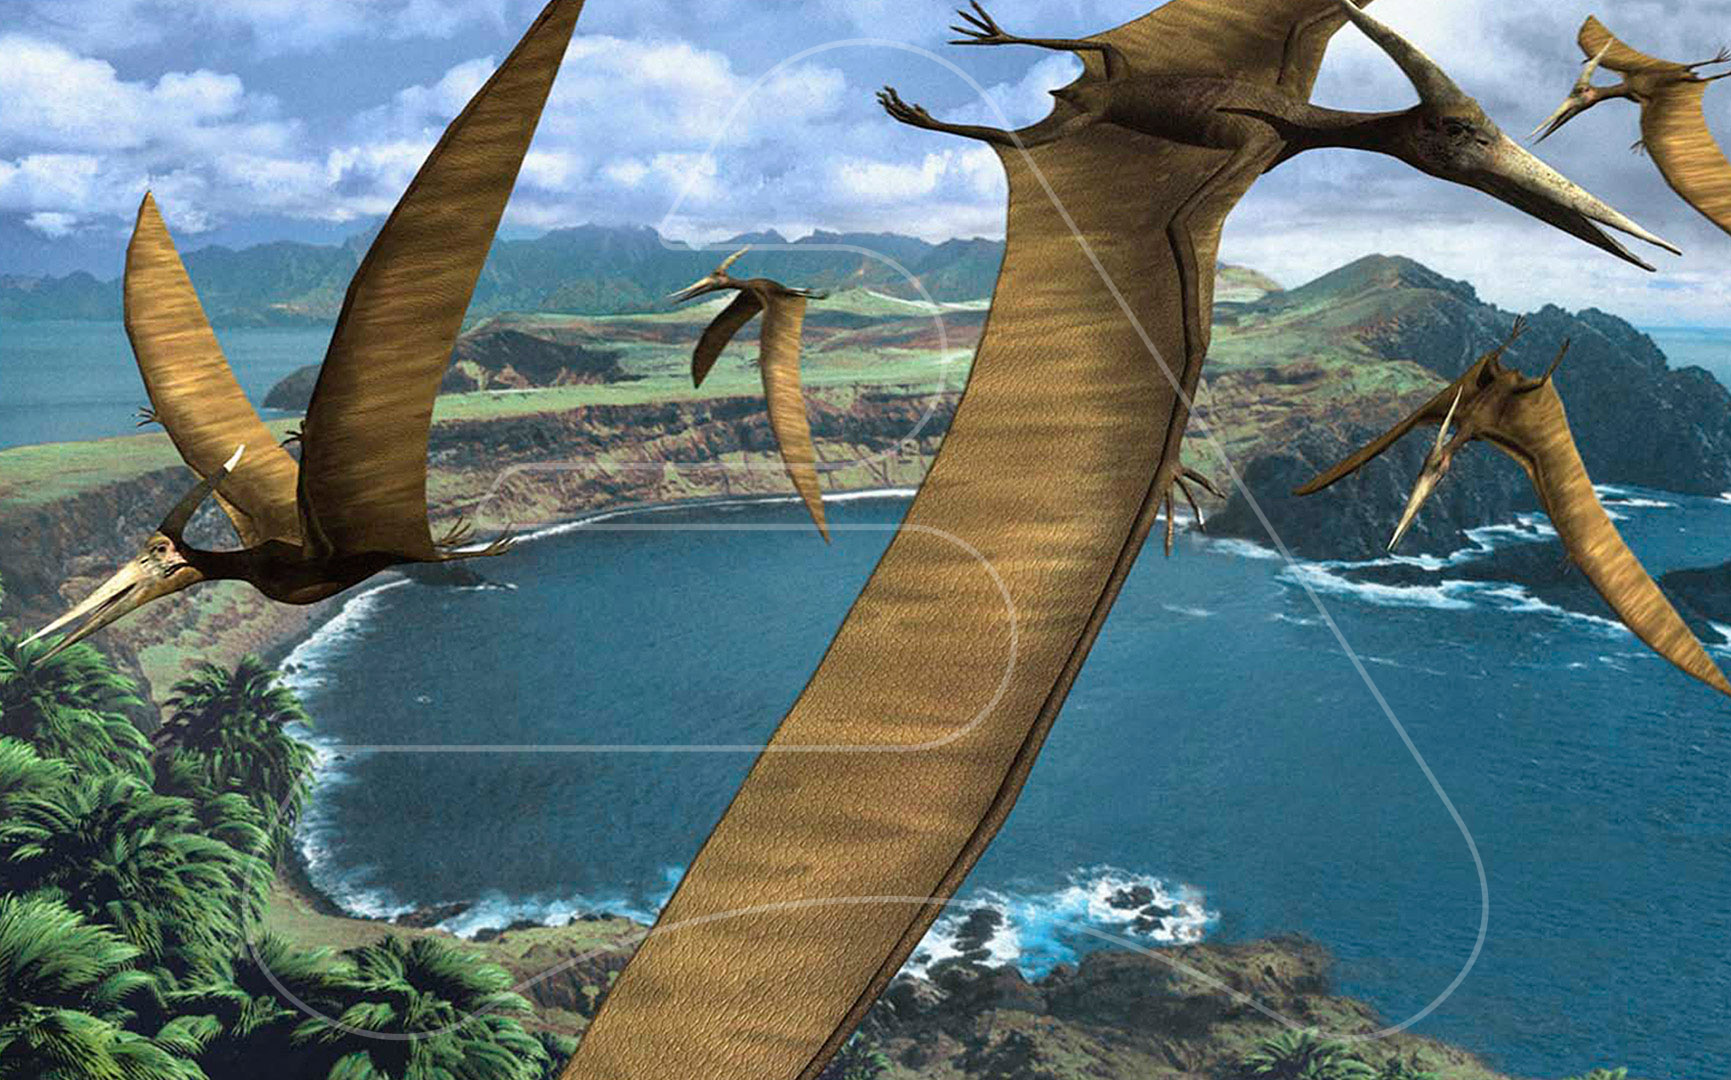 Pterodactyls at present time / MC publishers / 3D modeling and llustration